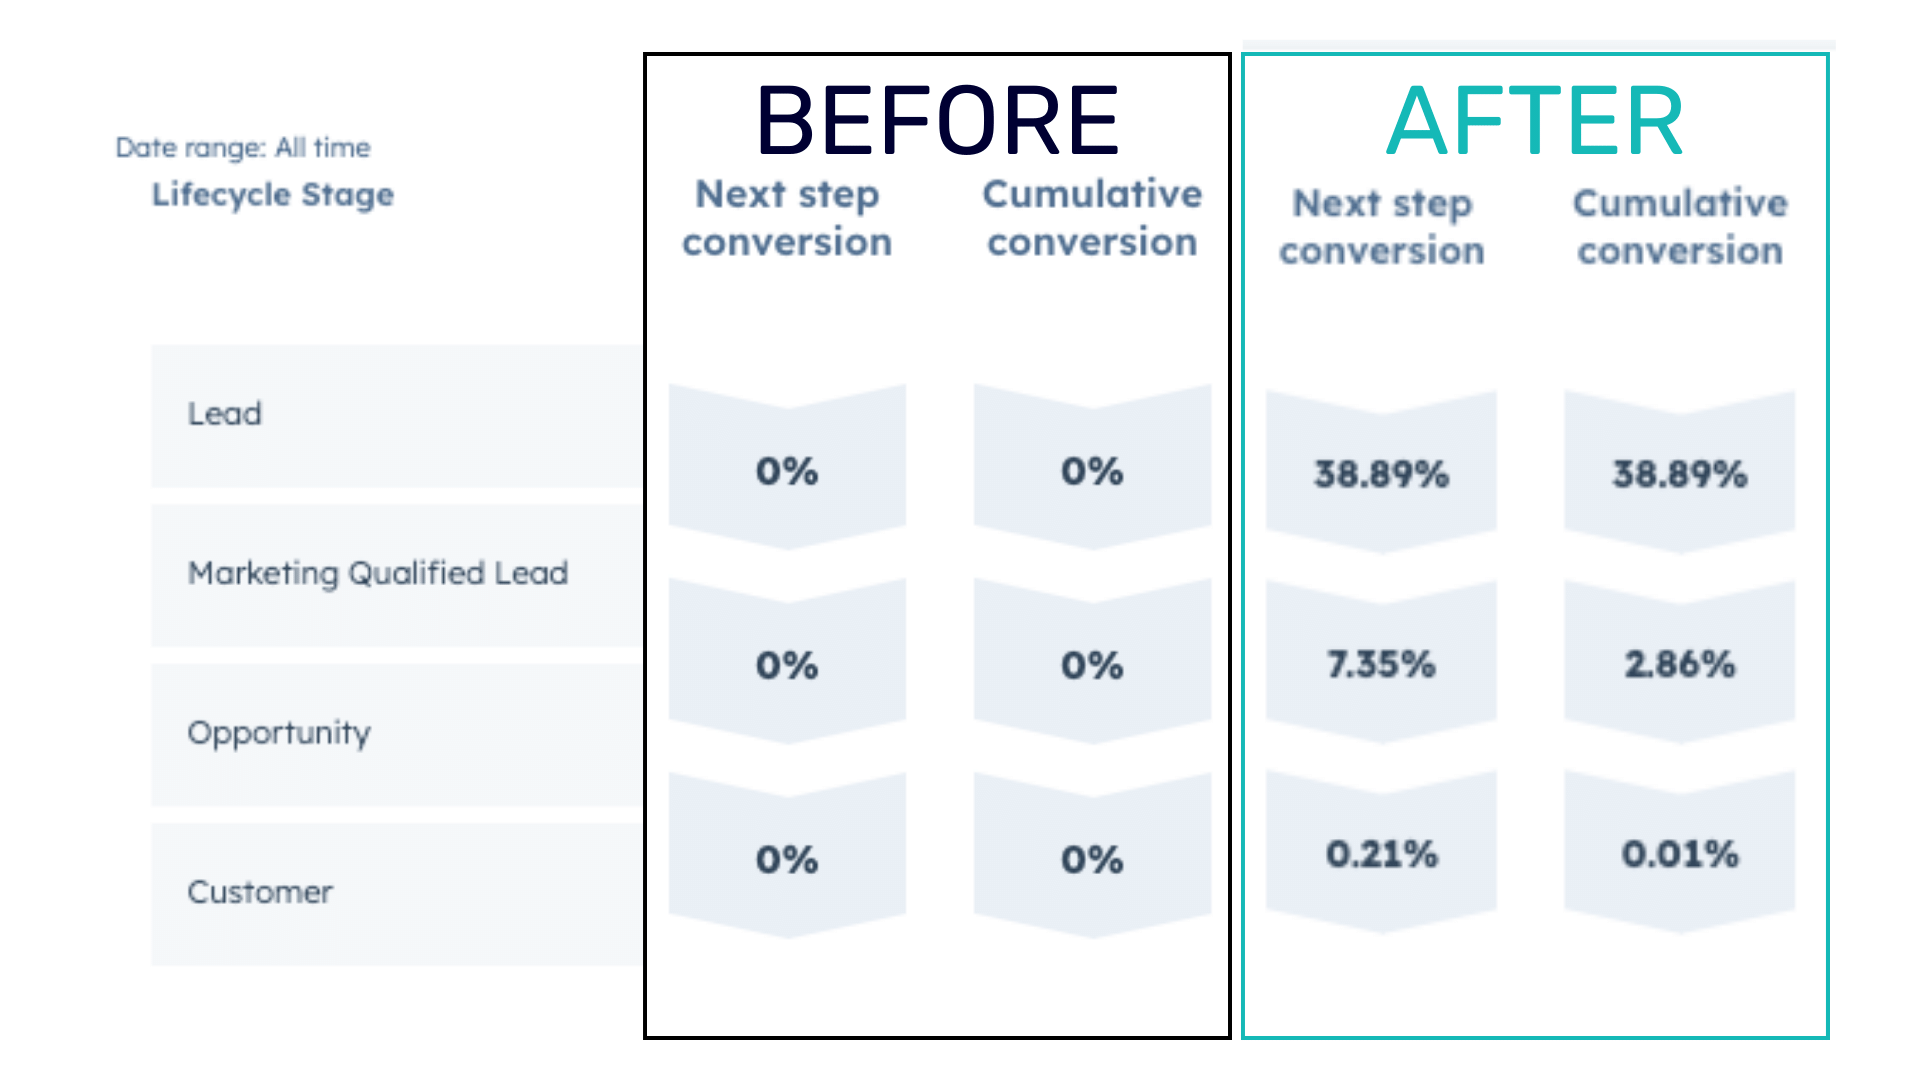 Omni - Lifecycle Stage Reporting Before & After